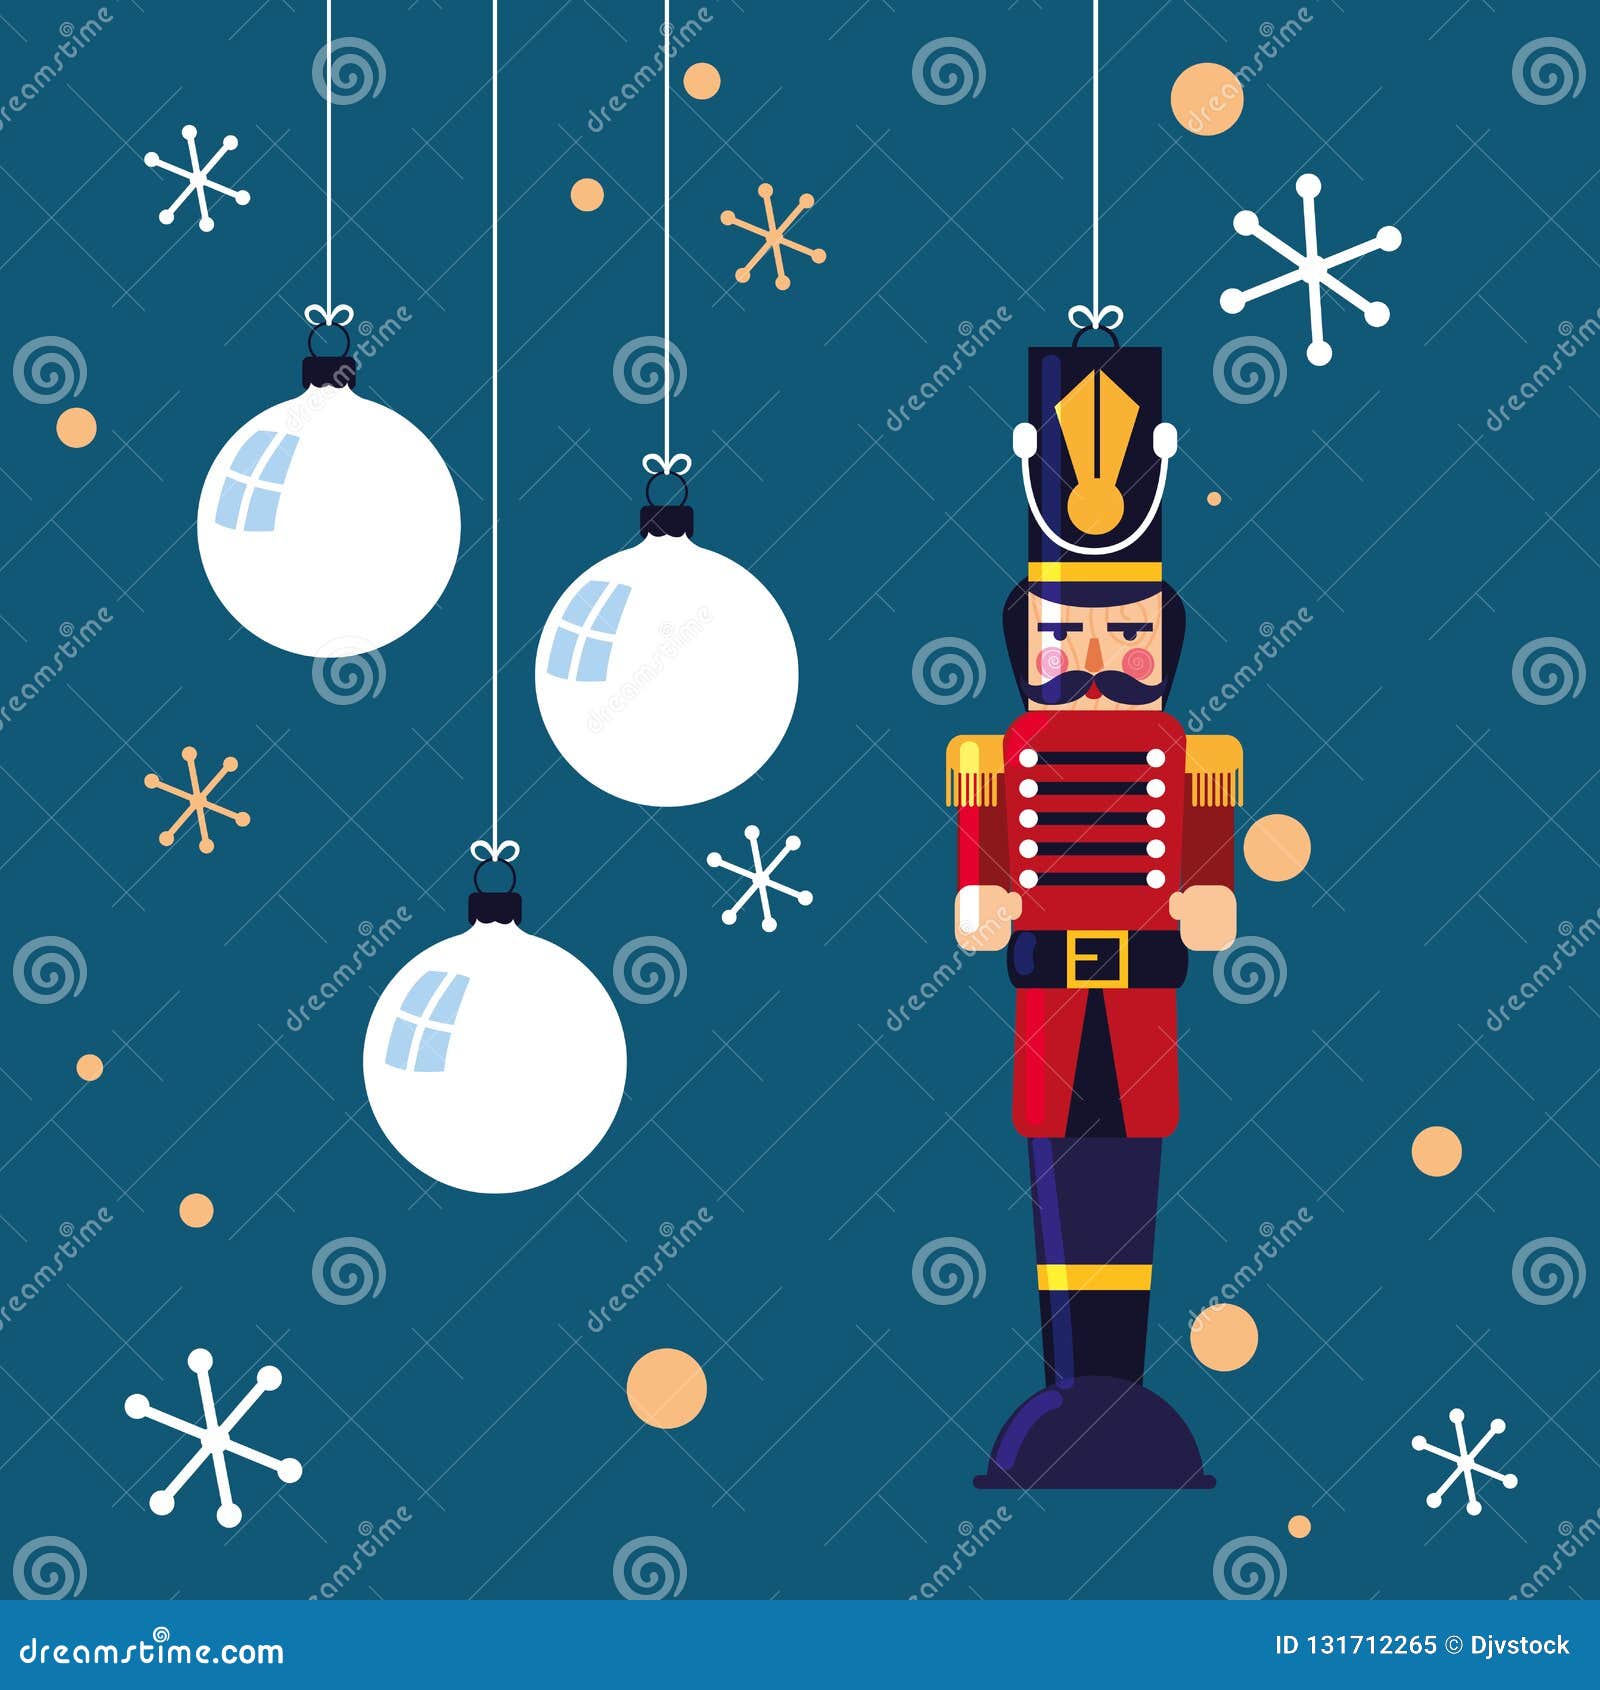 Download Nutcracker Soldier Toy With Balls Of Christmas Stock ...